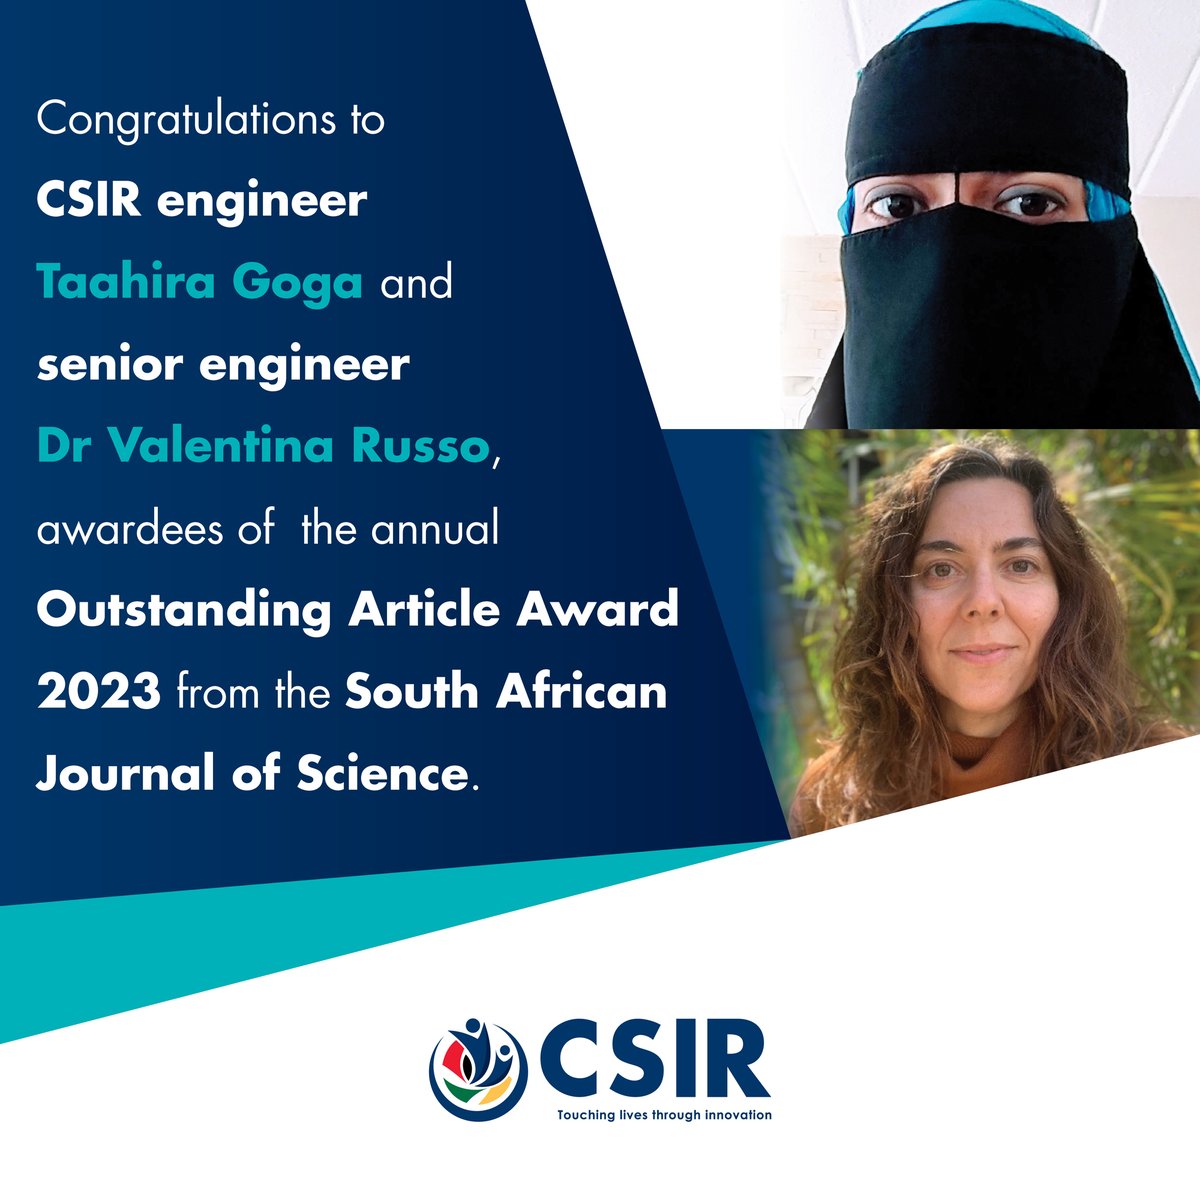 1/2 Congrats to #TeamCSIR engineer Taahira Goga & senior engineer Dr Valentina Russo! They are awardees of the annual Outstanding Article Award 2023 from the @SAJS_Official. The recognition comes from their co-authored paper, ‘A lifecycle-based evaluation of greenhouse gas ...